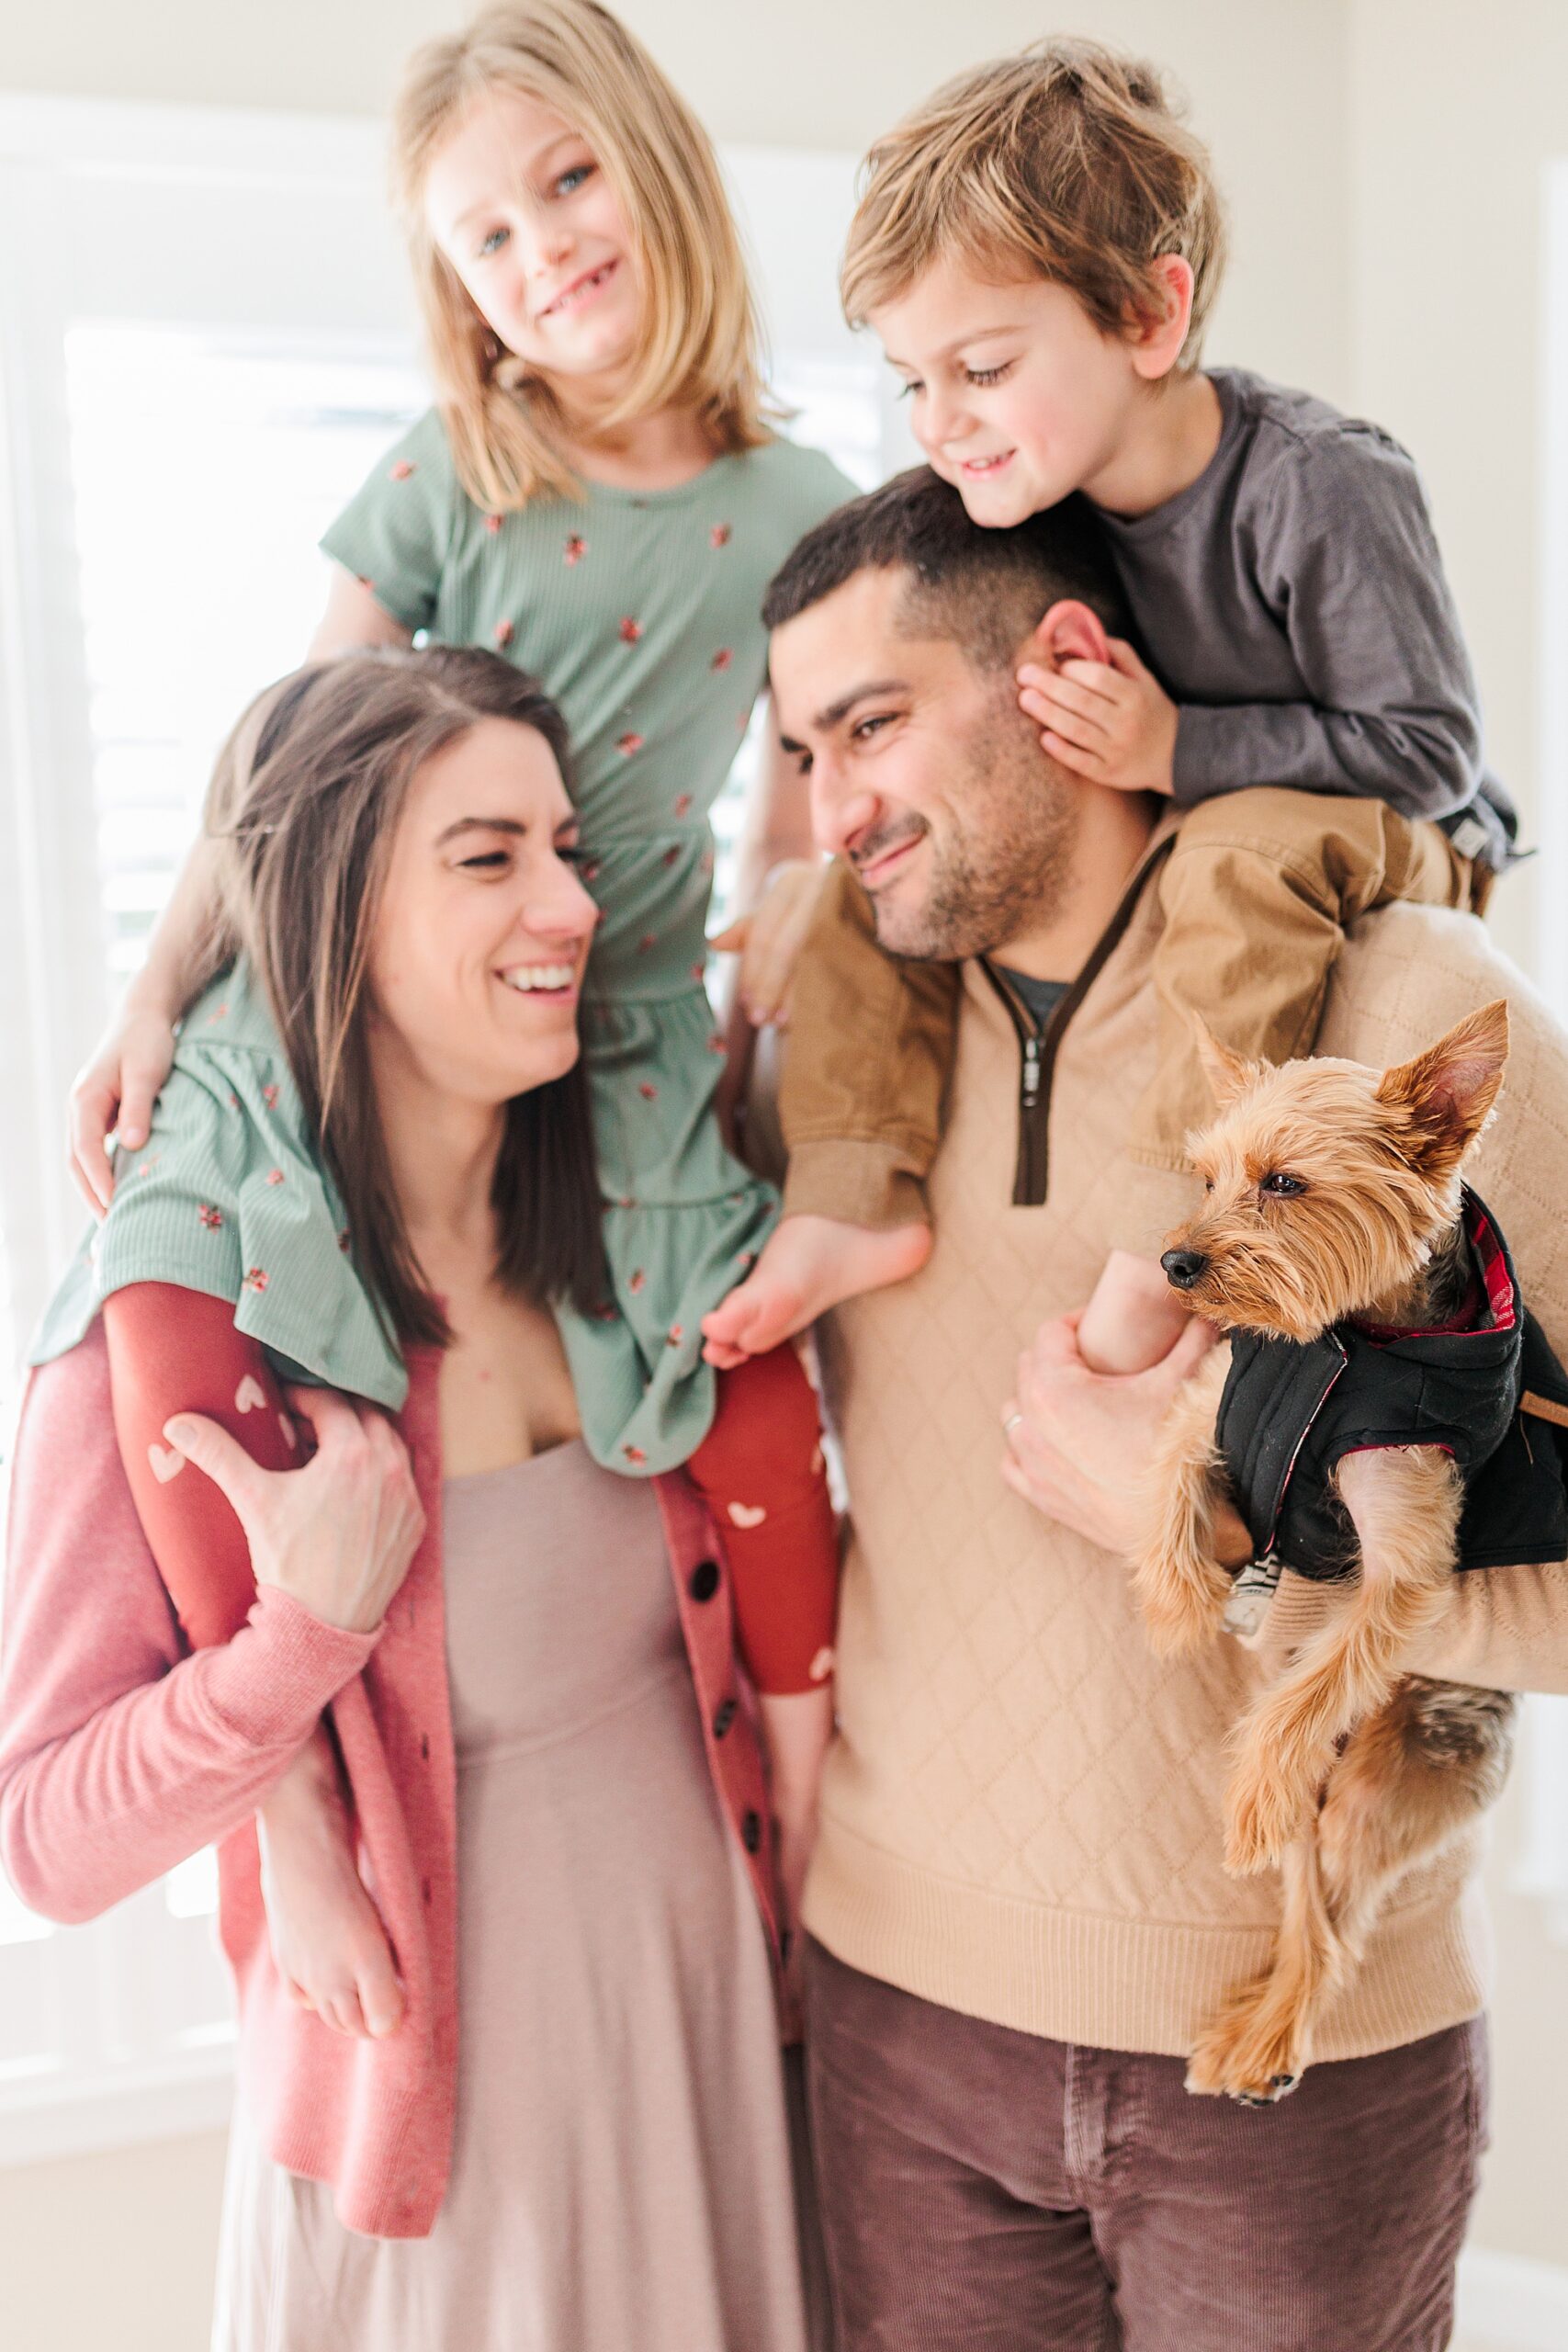 parents smile at each other with kids on their shoulders and holding small dog